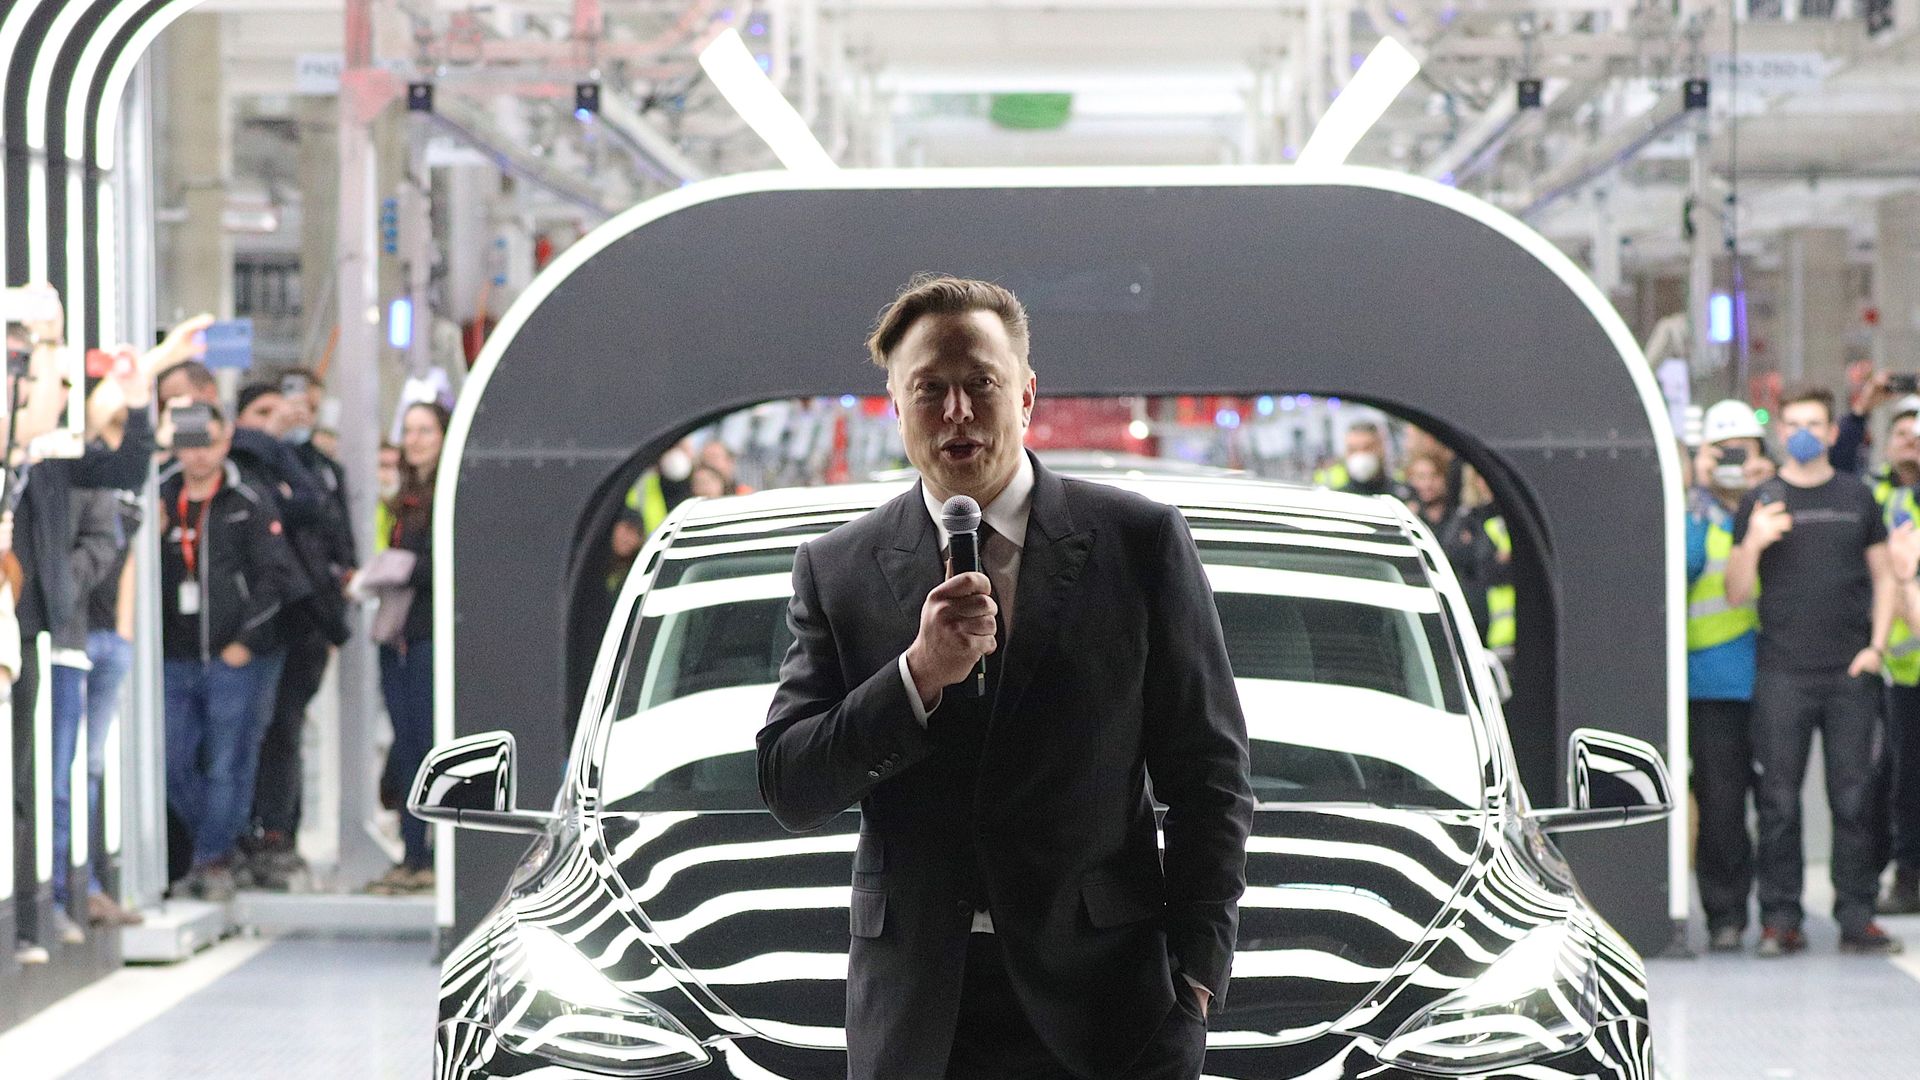 Tesla CEO Elon Musk speaks during the official opening of the new Tesla electric car manufacturing plant on March 22, 2022 near Gruenheide, Germany